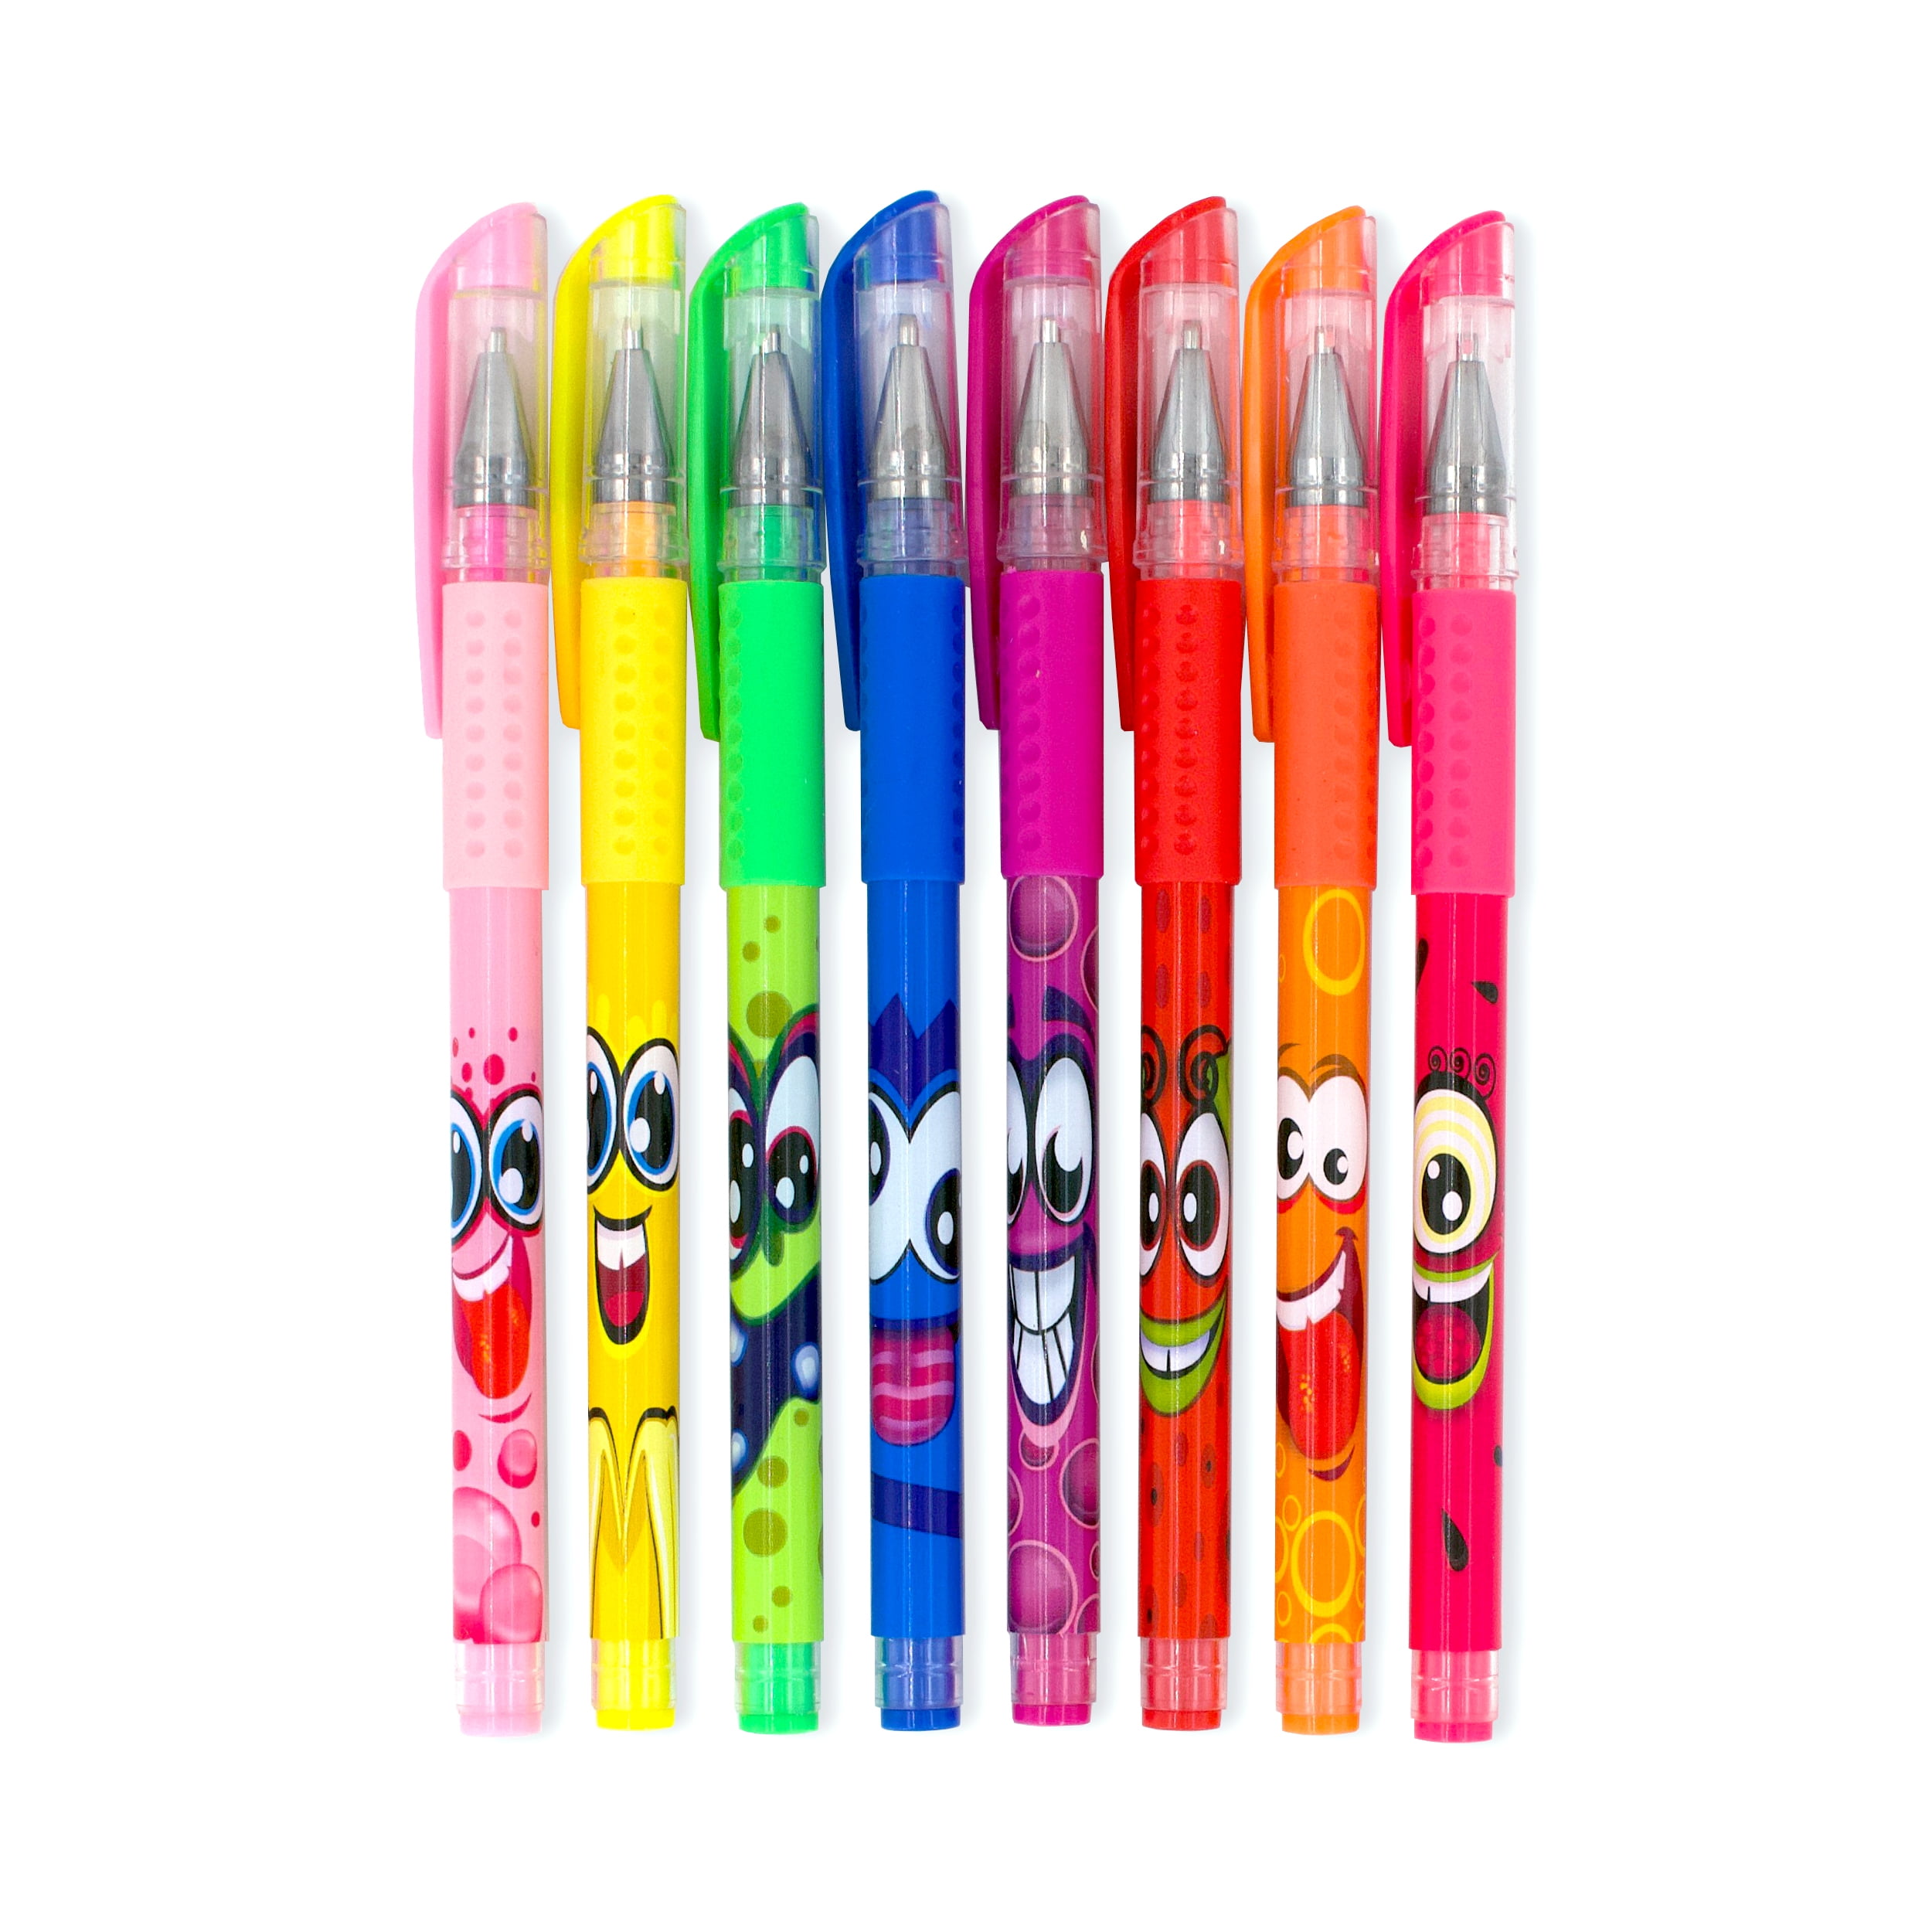 Scentos Scented Gel Pens for Kids - Assorted Colorful Pens - Fine Point Gel  Pen Set - For Ages 3 and Up - 8 Count (Glitter)